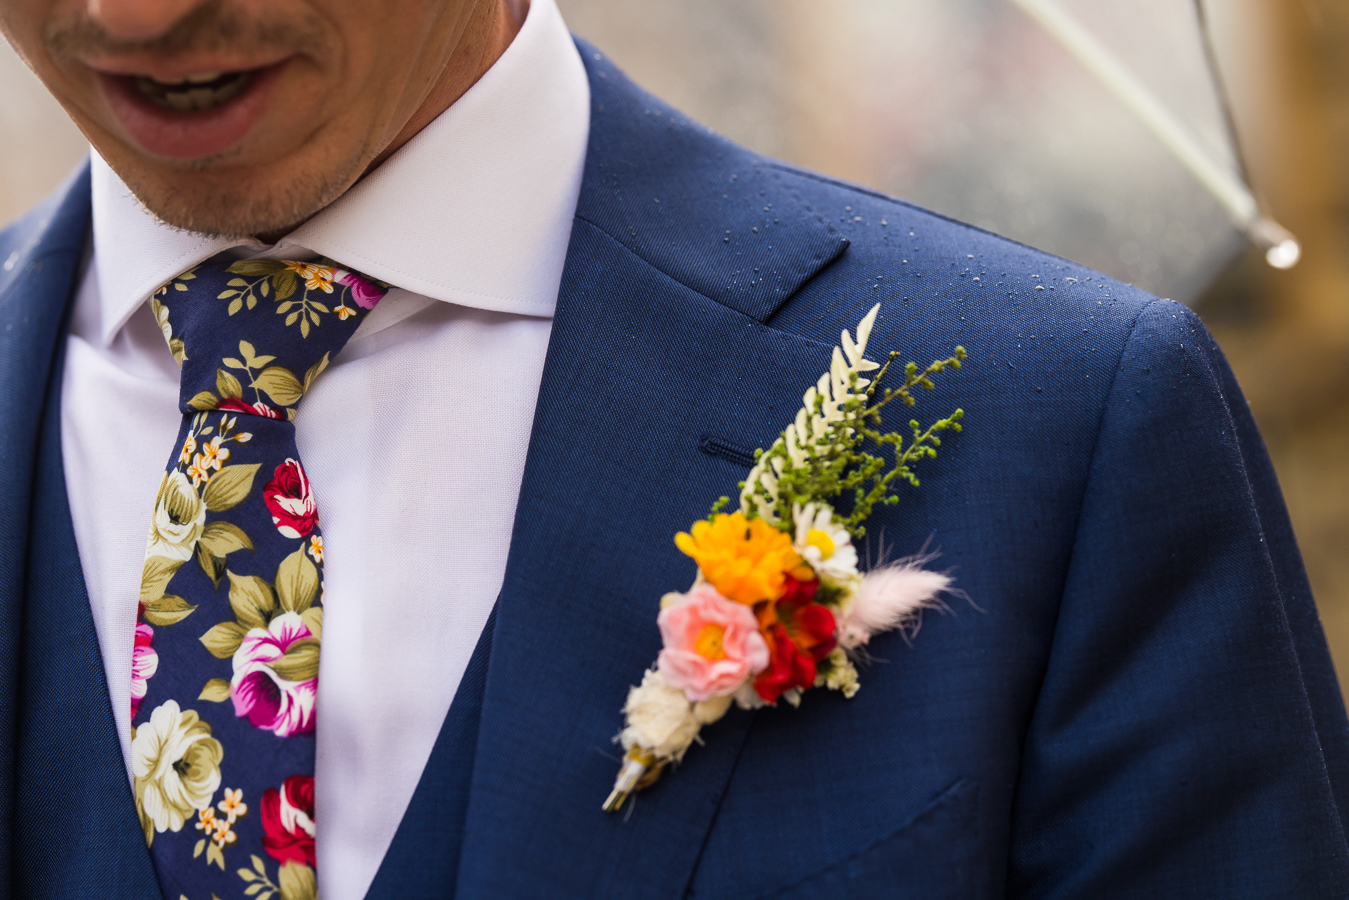 best pa wedding photographer, lisa rhinehart, captures this close up image of the grooms vibrant blue tux covered in tiny rain droplets with his colorful tie and boutineer on his chest